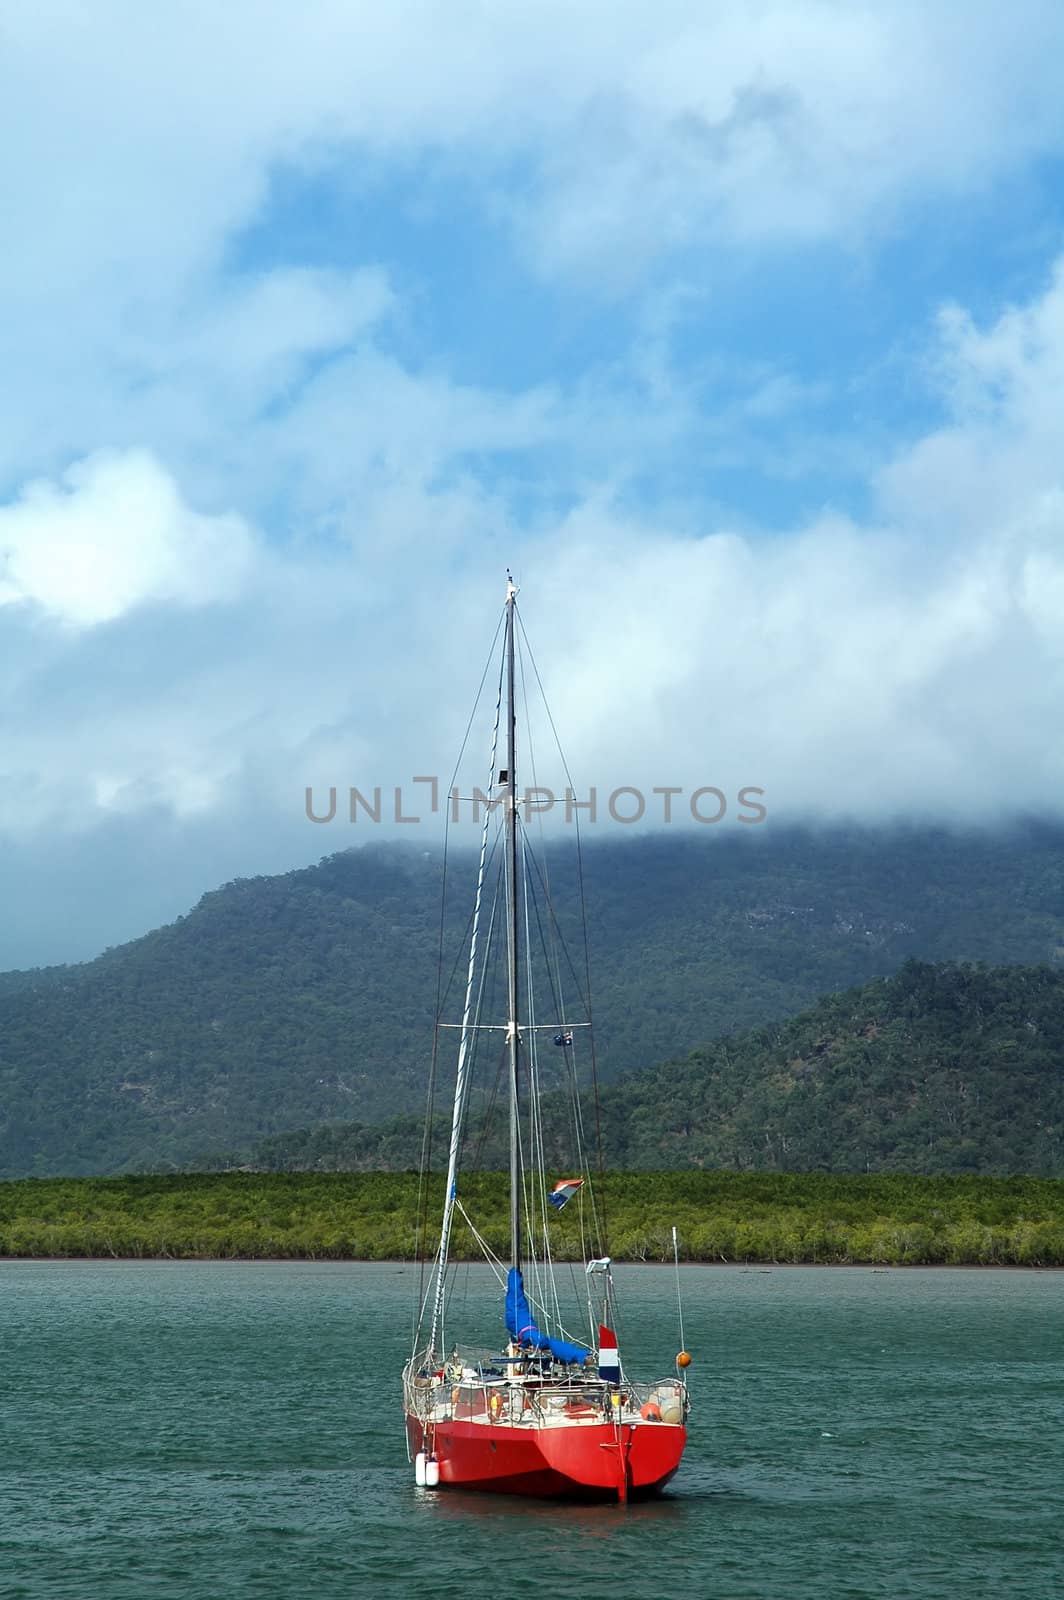 red abandoned sailboat with french and australian flags, hills in background, blue sky with clouds